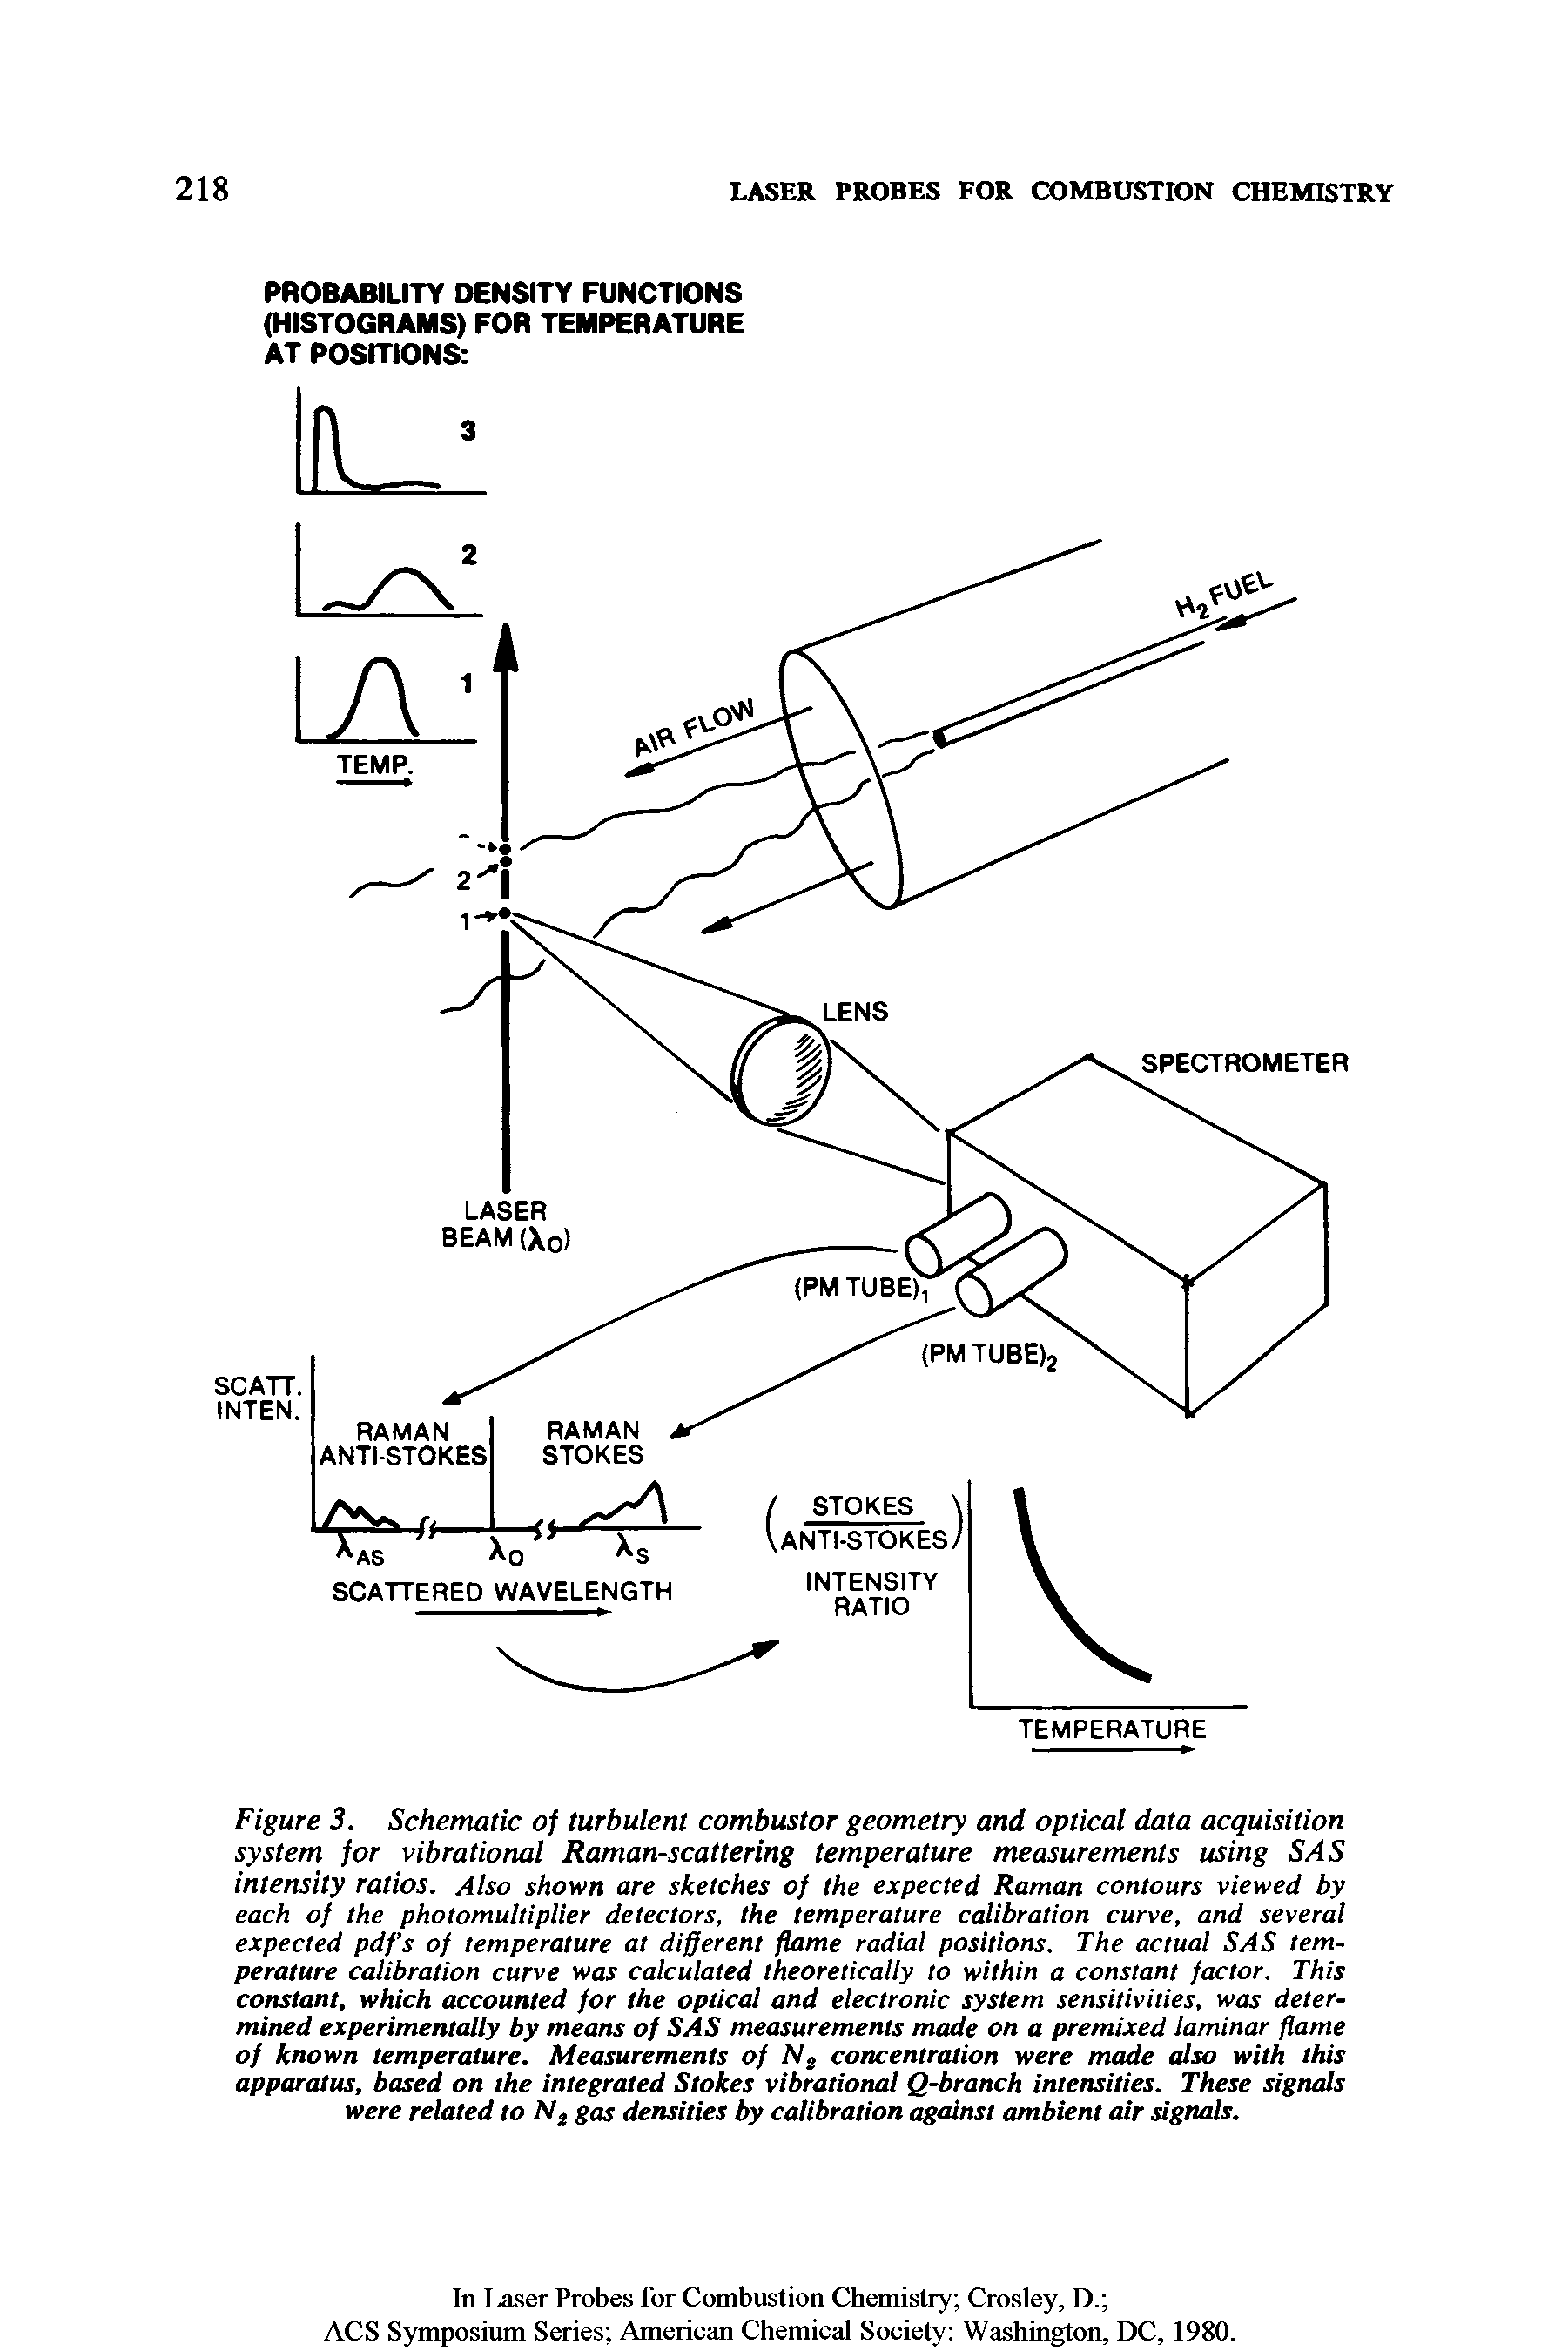 Figure 3. Schematic of turbulent combustor geometry and optical data acquisition system for vibrational Raman-scattering temperature measurements using SAS intensity ratios. Also shown are sketches of the expected Raman contours viewed by each of the photomultiplier detectors, the temperature calibration curve, and several expected pdf s of temperature at different flame radial positions. The actual SAS temperature calibration curve was calculated theoretically to within a constant factor. This constant, which accounted for the optical and electronic system sensitivities, was determined experimentally by means of SAS measurements made on a premixed laminar flame of known temperature. Measurements of Ne concentration were made also with this apparatus, based on the integrated Stokes vibrational Q-branch intensities. These signals were related to gas densities by calibration against ambient air signals.